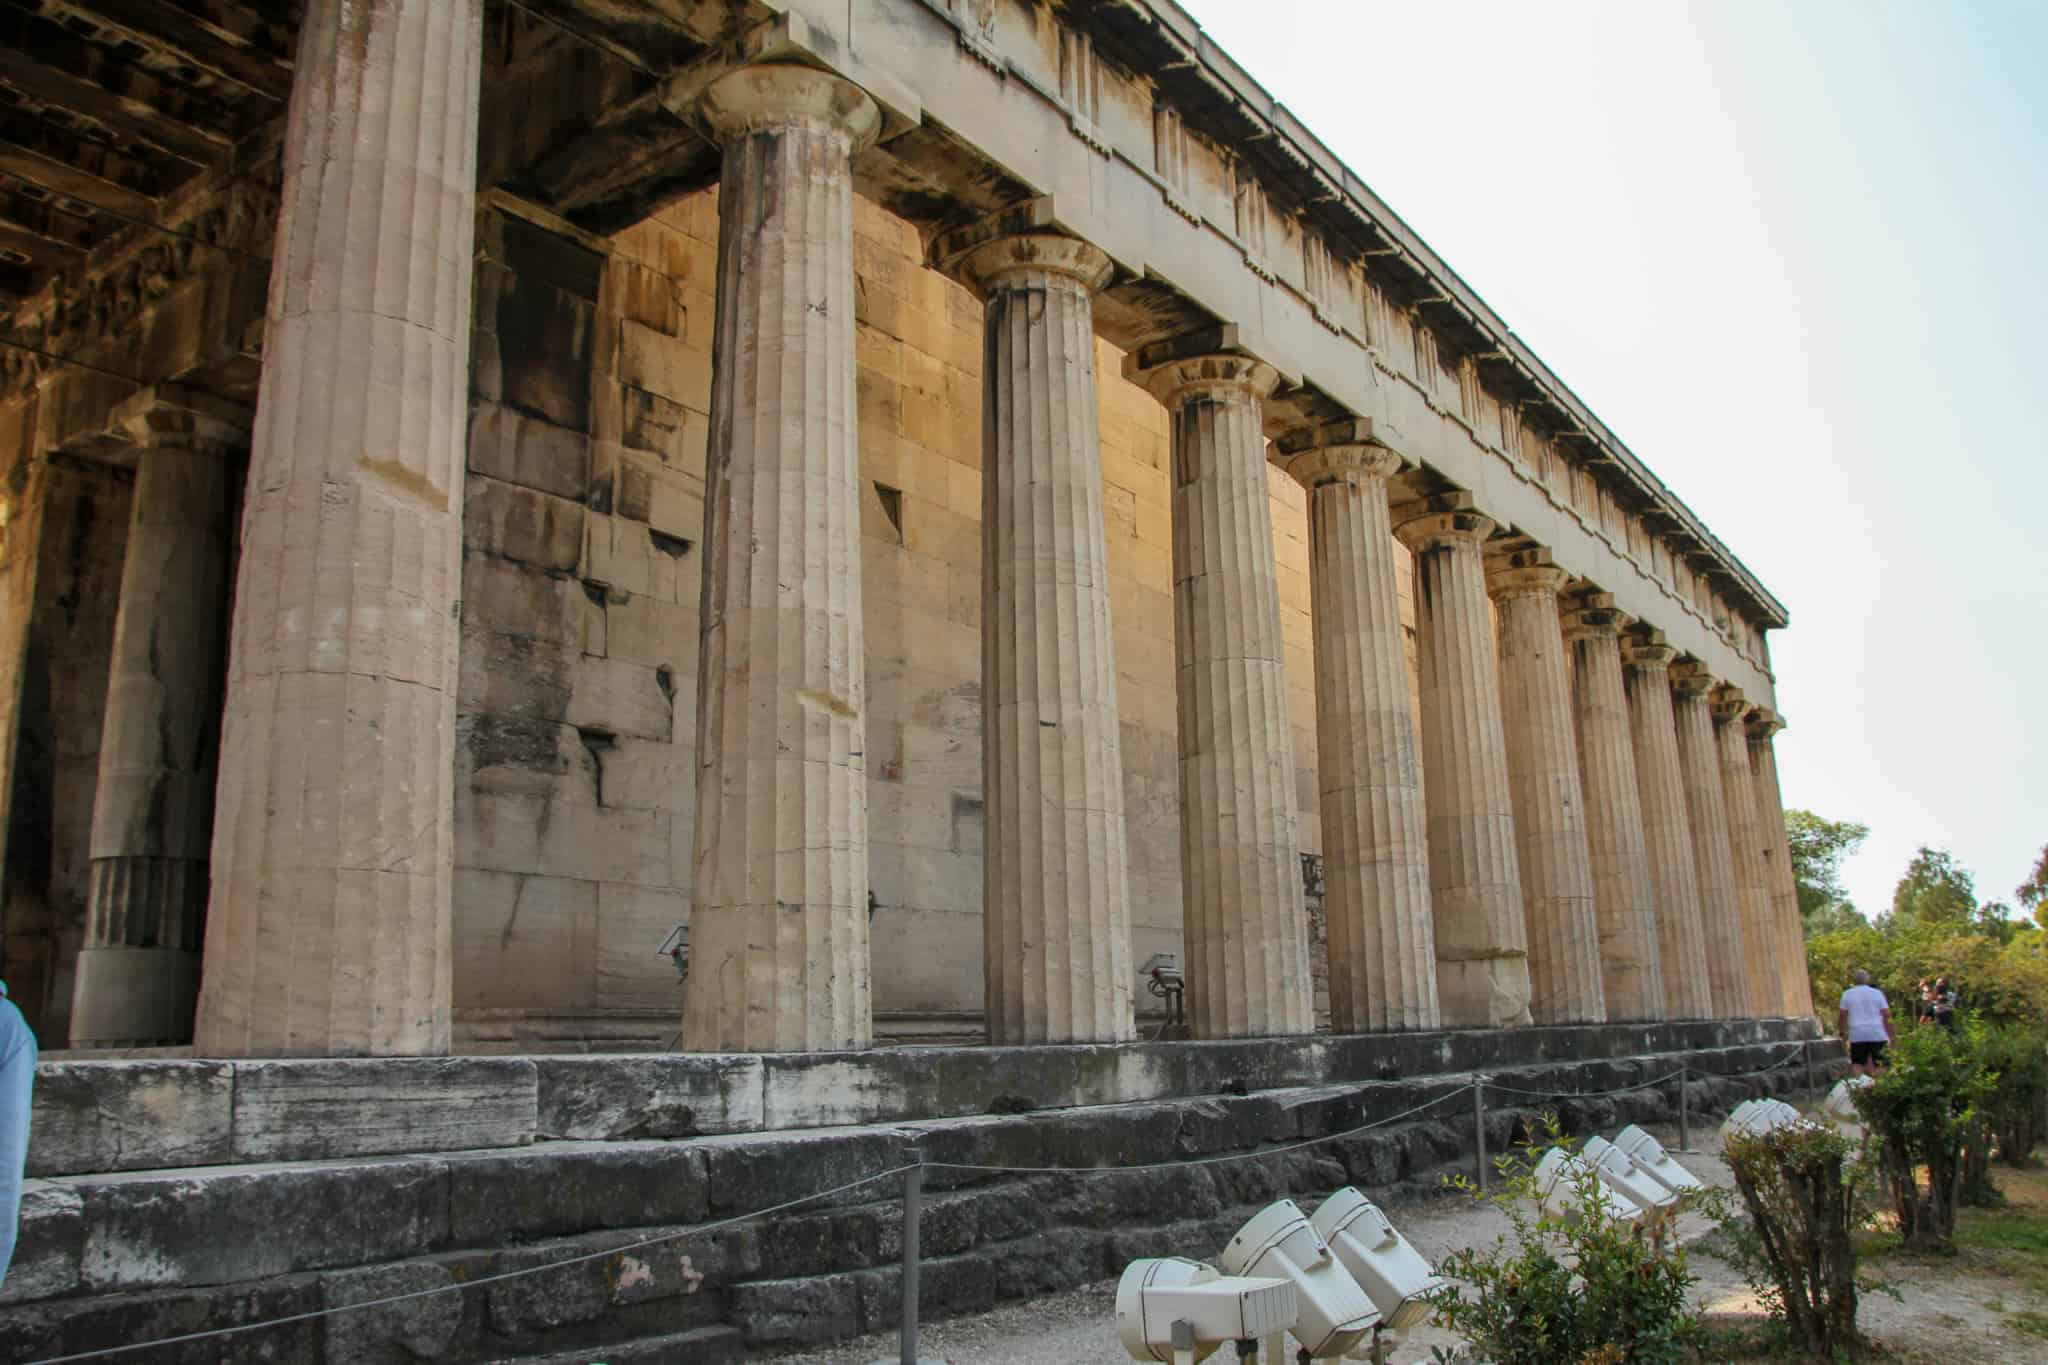 The Ancient Agora is one of the ruins in Athens